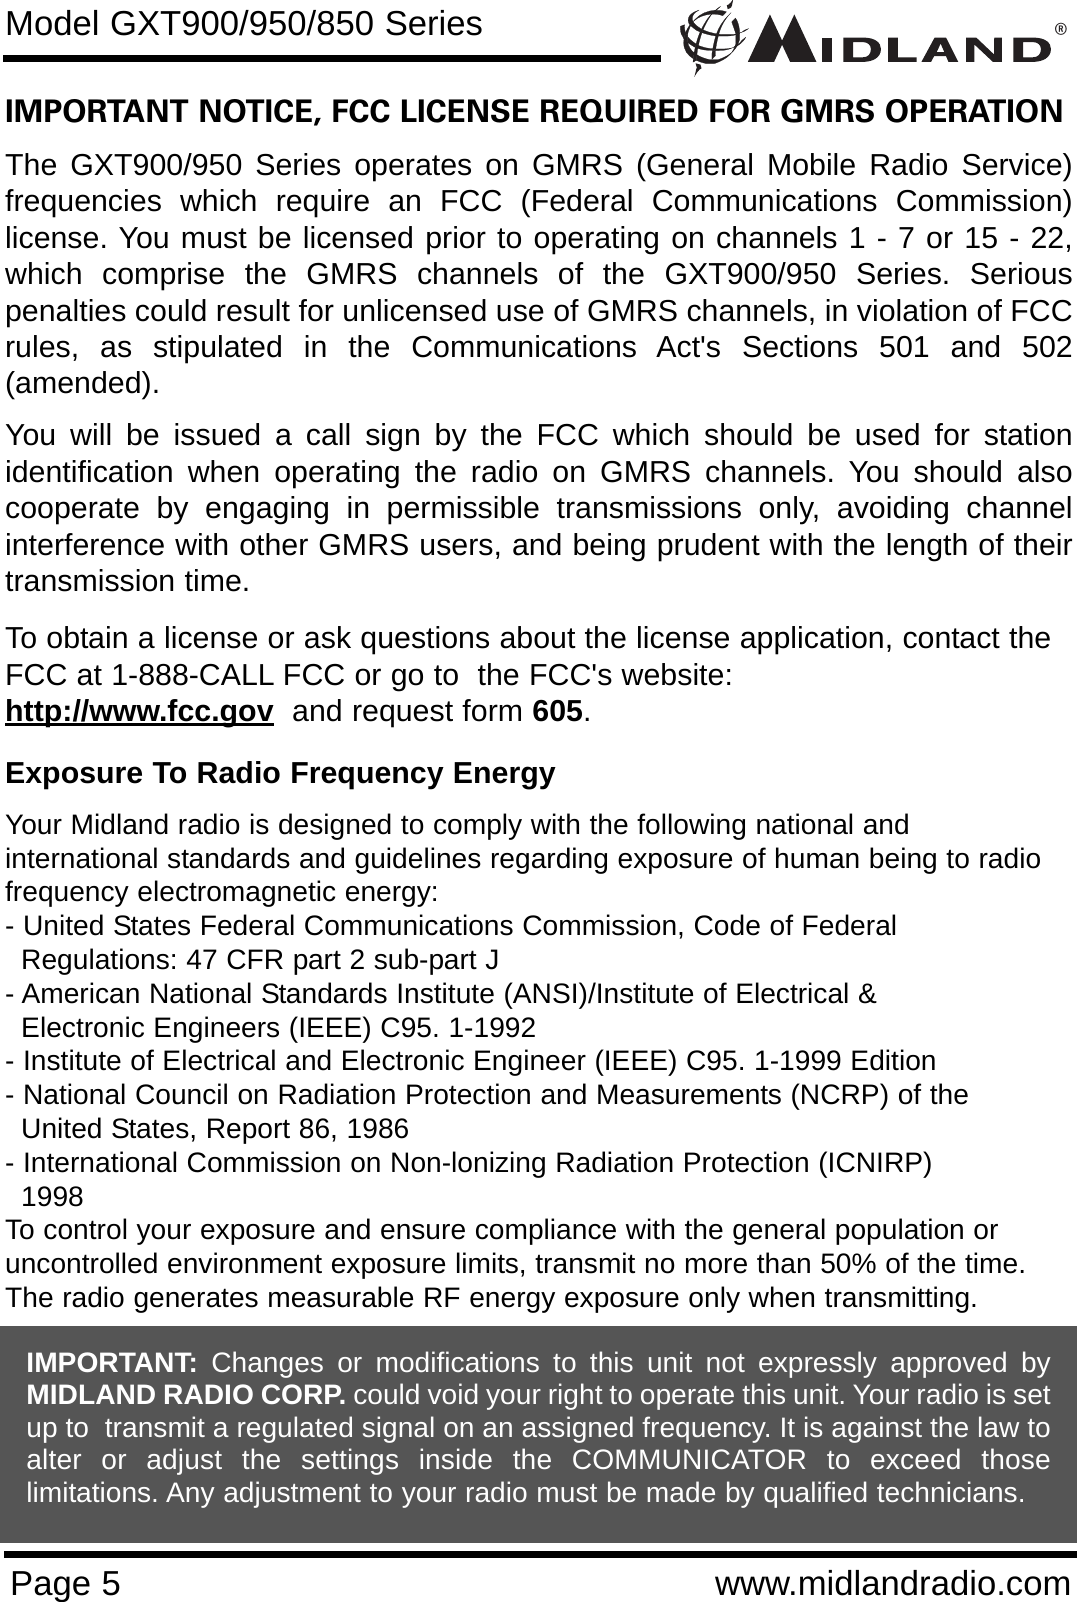 ®Page 5 www.midlandradio.comIMPORTANT NOTICE, FCC LICENSE REQUIRED FOR GMRS OPERATIONThe GXT900/950 Series operates on GMRS (General Mobile Radio Service)frequencies which require an FCC (Federal Communications Commission)license. You must be licensed prior to operating on channels 1 - 7 or 15 - 22,which comprise the GMRS channels of the GXT900/950 Series. Seriouspenalties could result for unlicensed use of GMRS channels, in violation of FCCrules, as stipulated in the Communications Act&apos;s Sections 501 and 502(amended).You will be issued a call sign by the FCC which should be used for stationidentification when operating the radio on GMRS channels. You should alsocooperate by engaging in permissible transmissions only, avoiding channelinterference with other GMRS users, and being prudent with the length of theirtransmission time.To obtain a license or ask questions about the license application, contact theFCC at 1-888-CALL FCC or go to  the FCC&apos;s website:  http://www.fcc.gov and request form 605.Exposure To Radio Frequency EnergyYour Midland radio is designed to comply with the following national and international standards and guidelines regarding exposure of human being to radiofrequency electromagnetic energy:- United States Federal Communications Commission, Code of Federal Regulations: 47 CFR part 2 sub-part J- American National Standards Institute (ANSI)/Institute of Electrical &amp; Electronic Engineers (IEEE) C95. 1-1992- Institute of Electrical and Electronic Engineer (IEEE) C95. 1-1999 Edition- National Council on Radiation Protection and Measurements (NCRP) of the United States, Report 86, 1986- International Commission on Non-lonizing Radiation Protection (ICNIRP) 1998To control your exposure and ensure compliance with the general population oruncontrolled environment exposure limits, transmit no more than 50% of the time.The radio generates measurable RF energy exposure only when transmitting.Model GXT900/950/850 SeriesIMPORTANT: Changes or modifications to this unit not expressly approved byMIDLAND RADIO CORP. could void your right to operate this unit. Your radio is setup to  transmit a regulated signal on an assigned frequency. It is against the law toalter or adjust the settings inside the COMMUNICATOR to exceed thoselimitations. Any adjustment to your radio must be made by qualified technicians.